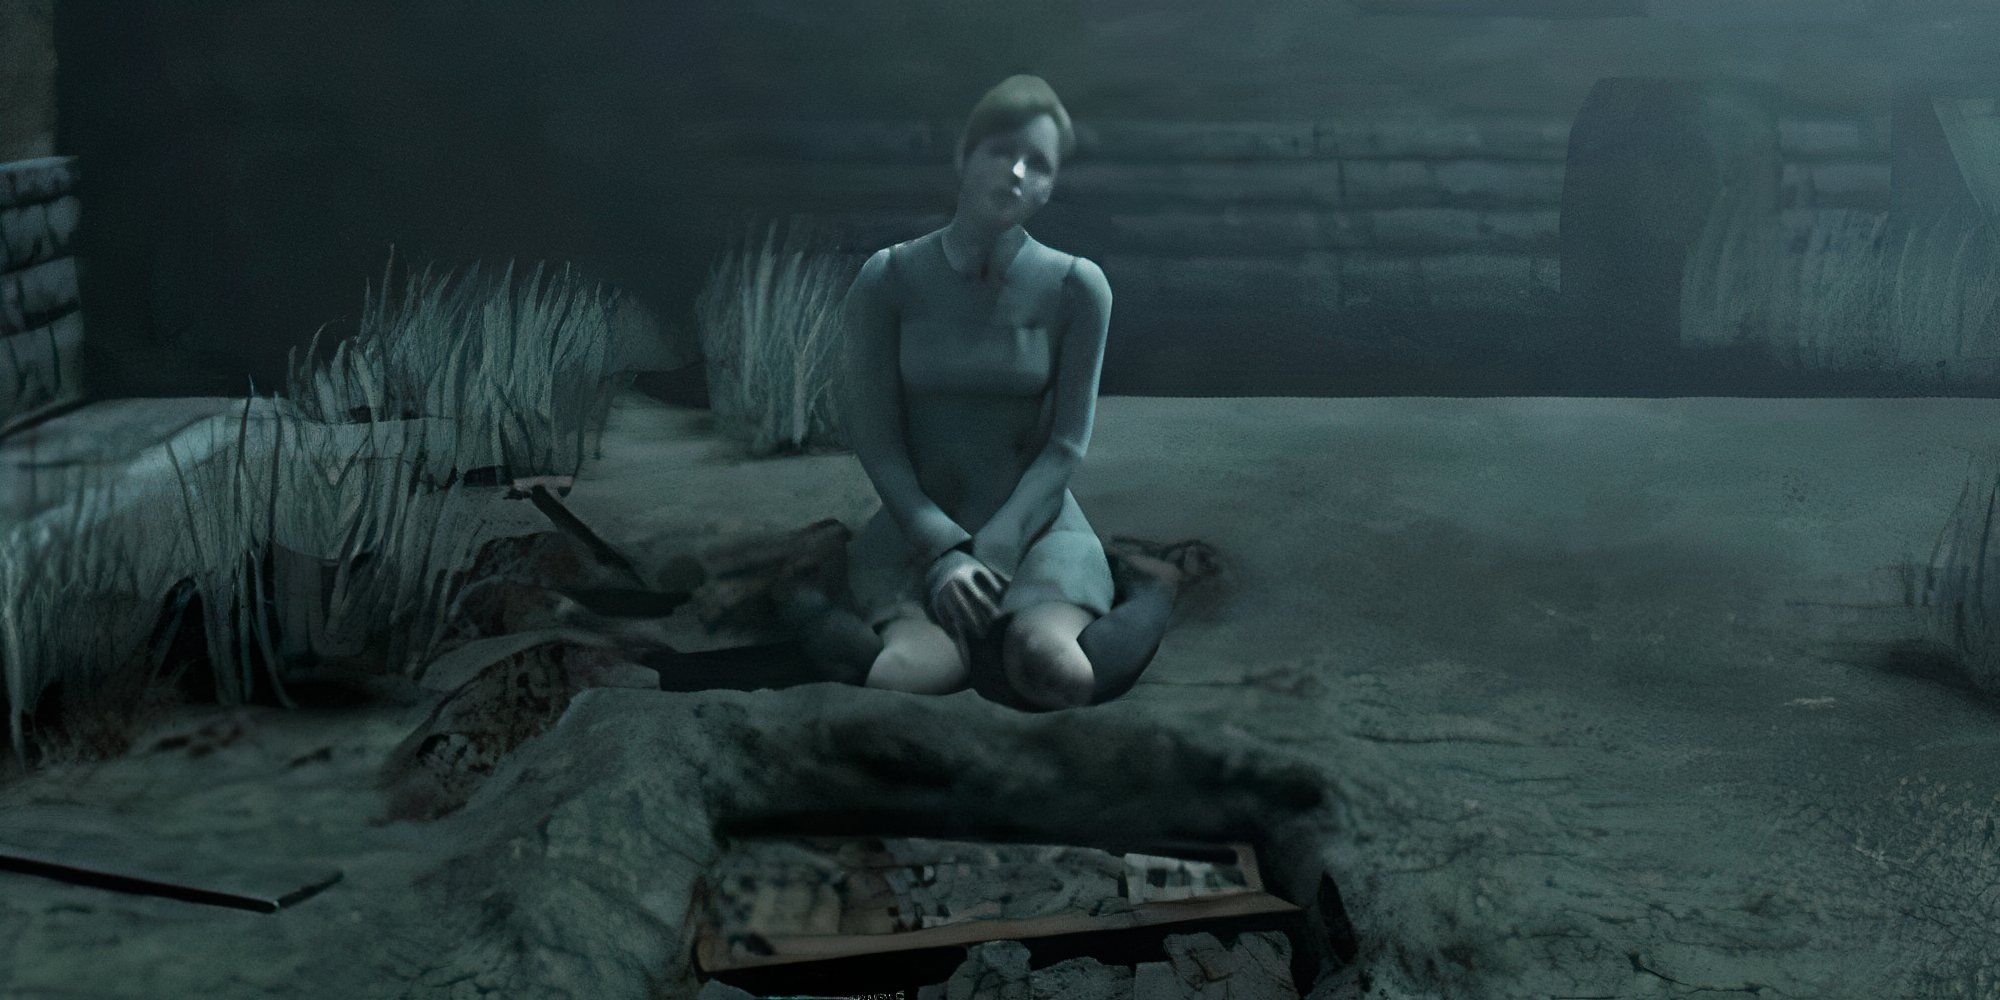 Jennifer kneeling in front of a grave in Rule of Rose. Everything is shades of grey.